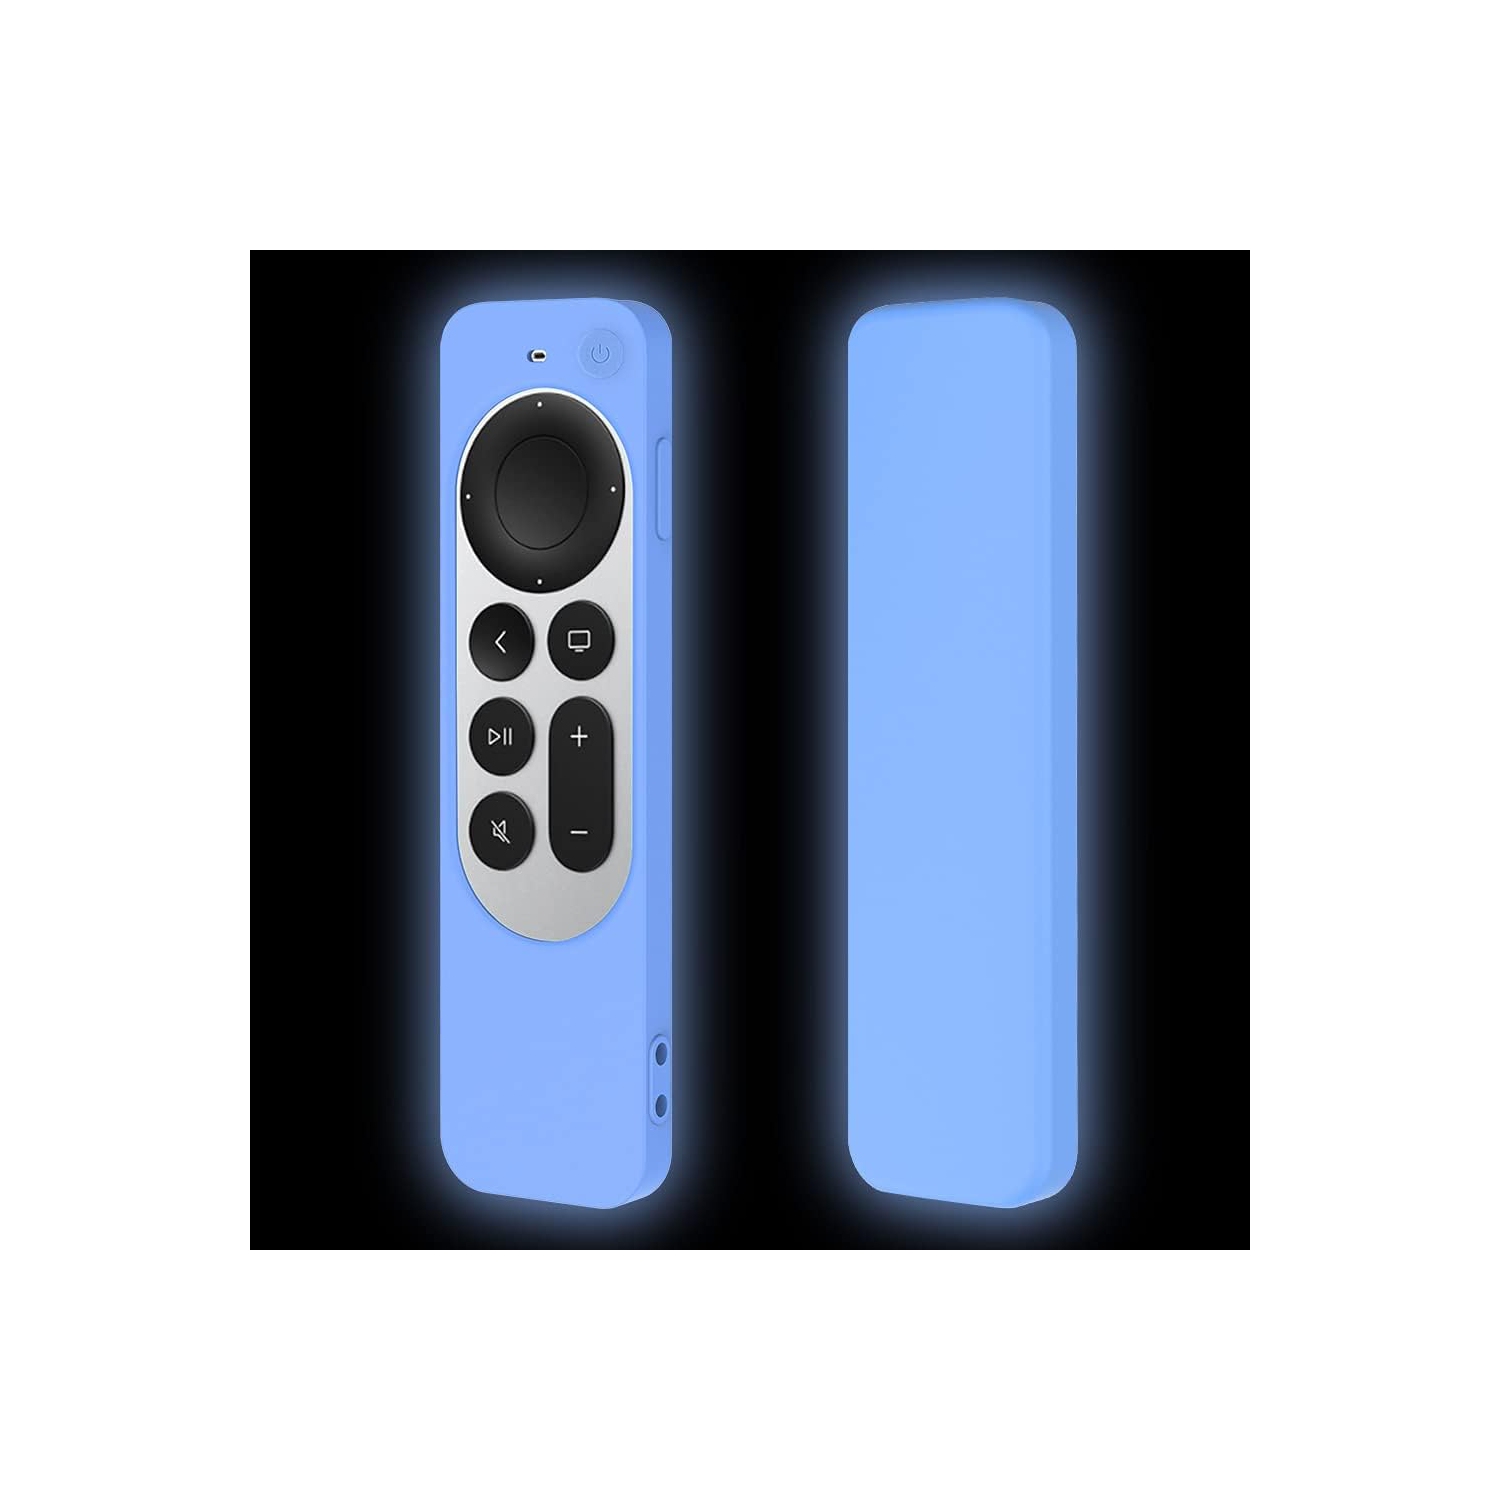 Cover Case Replacement for New Apple 4k TV Series 6 Generation 2021 Remote Control, Blue Siri 2nd Silicone Skin